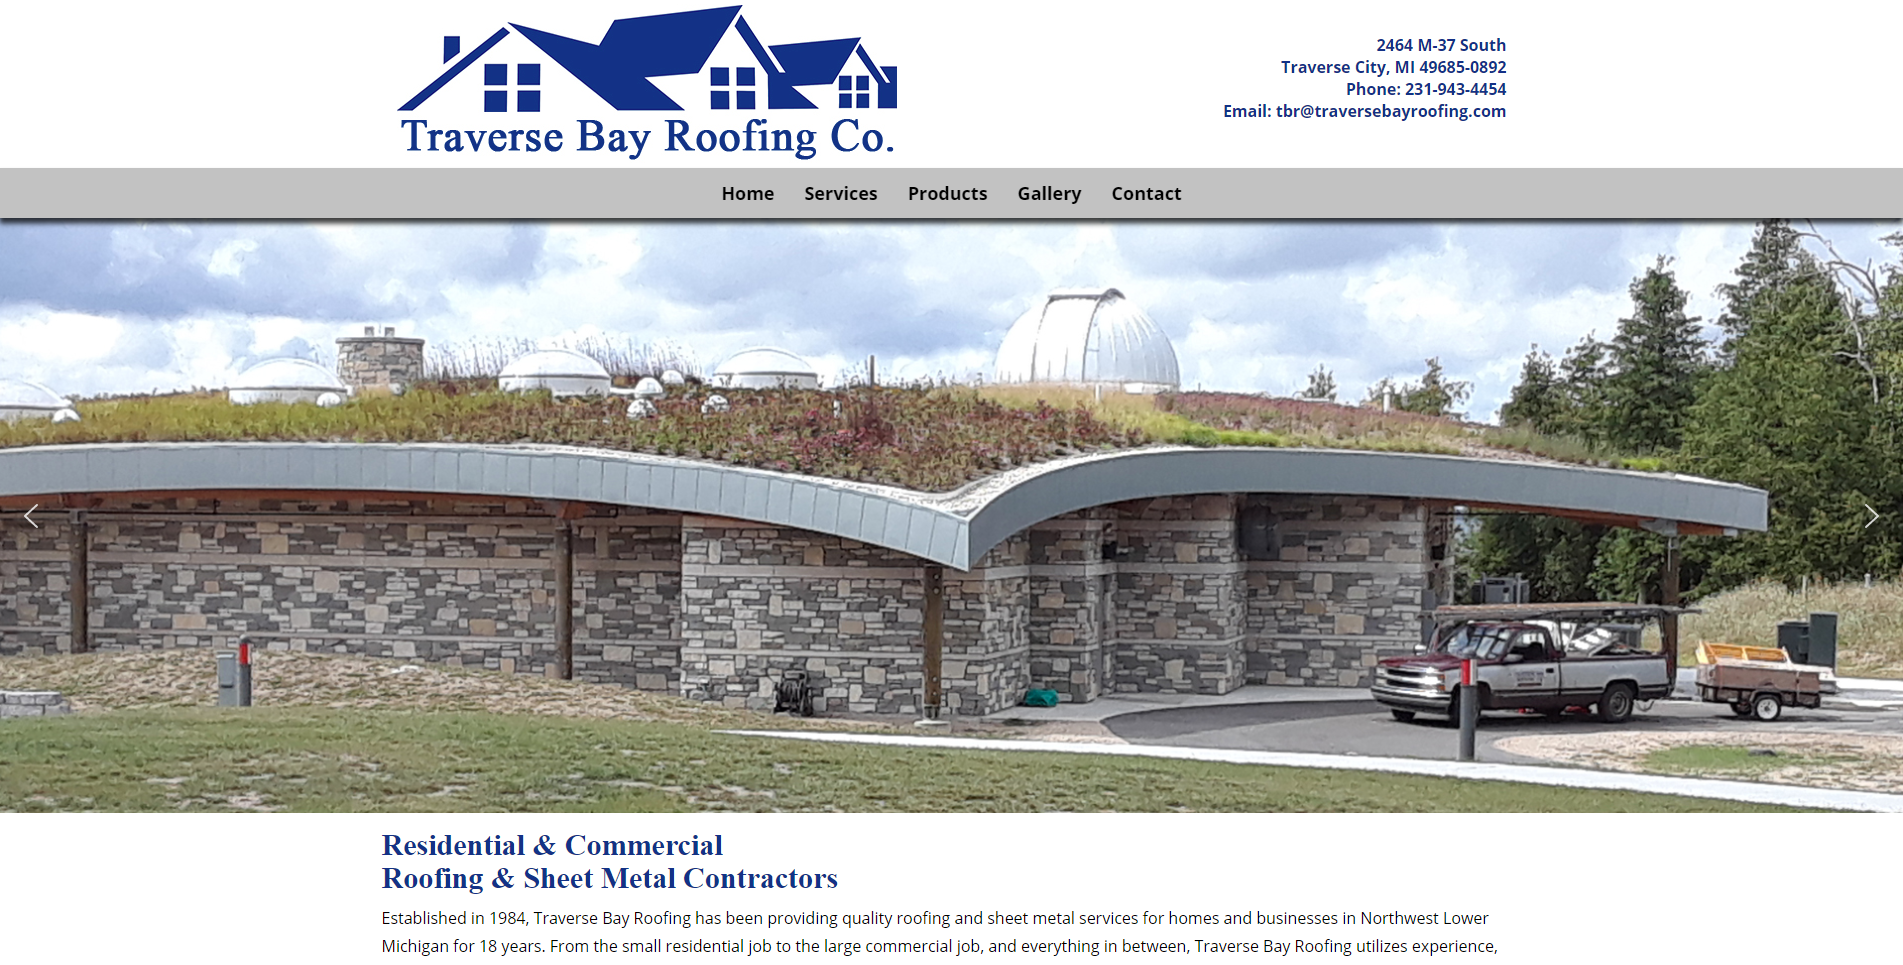 Traverse Bay Roofing